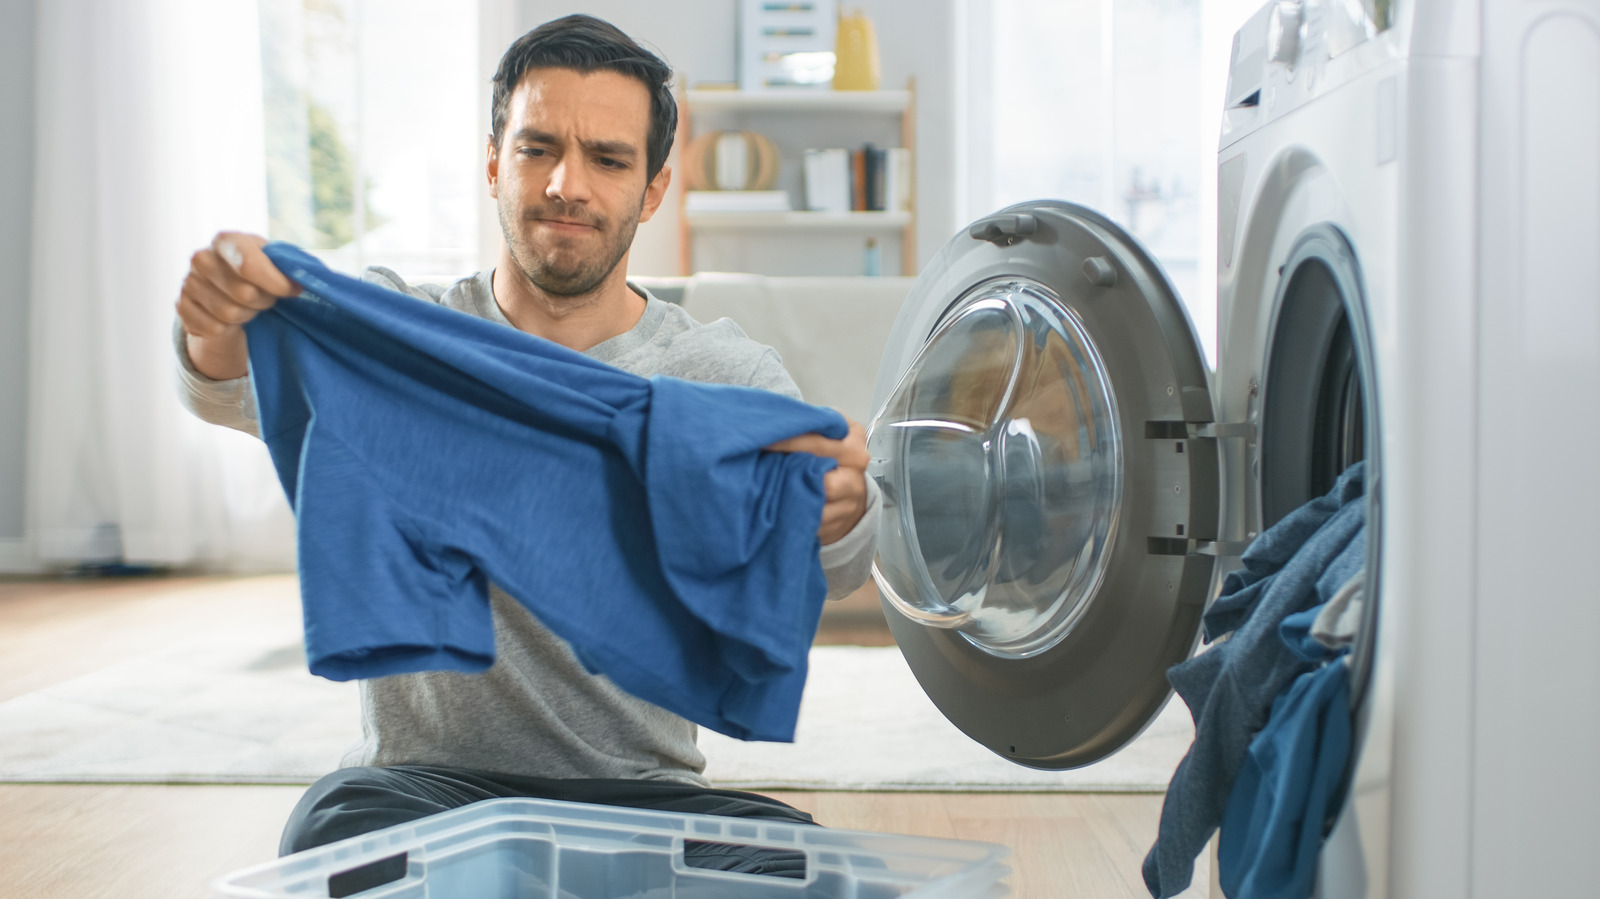 How To Shrink Your Clothes The Right Way